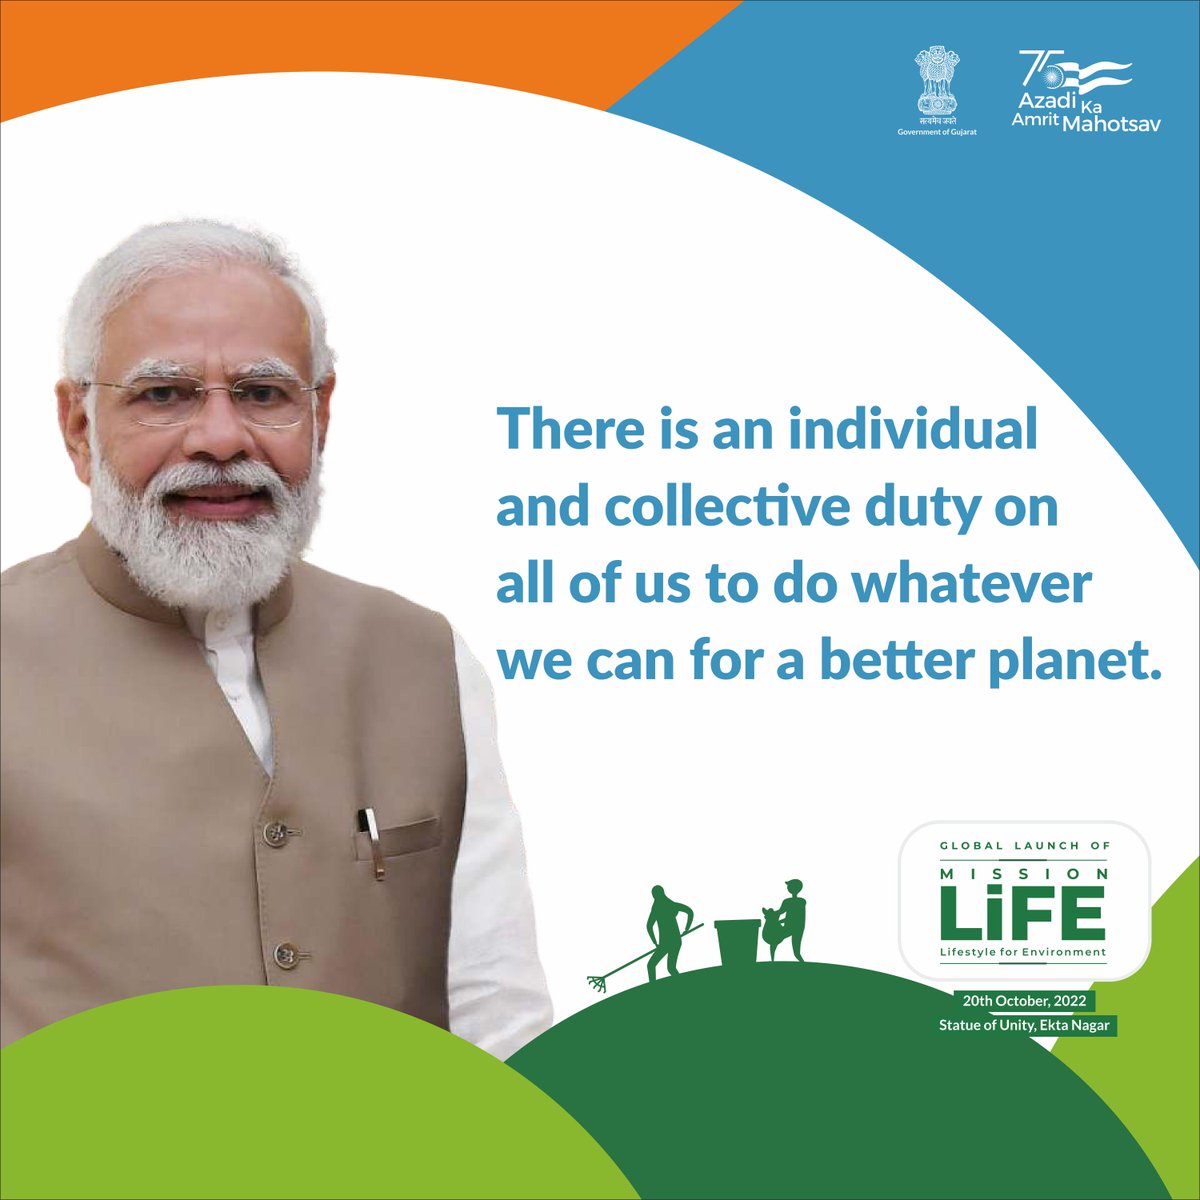 'There is an individual and collective duty on all of us to do whatever we can for better planet.' Honourable Prime Minister of India @narendramodi will be launching Mission #LiFE today at @souindia in presence of @UN Secretary General @antonioguterres. #LiFE #Gujarat